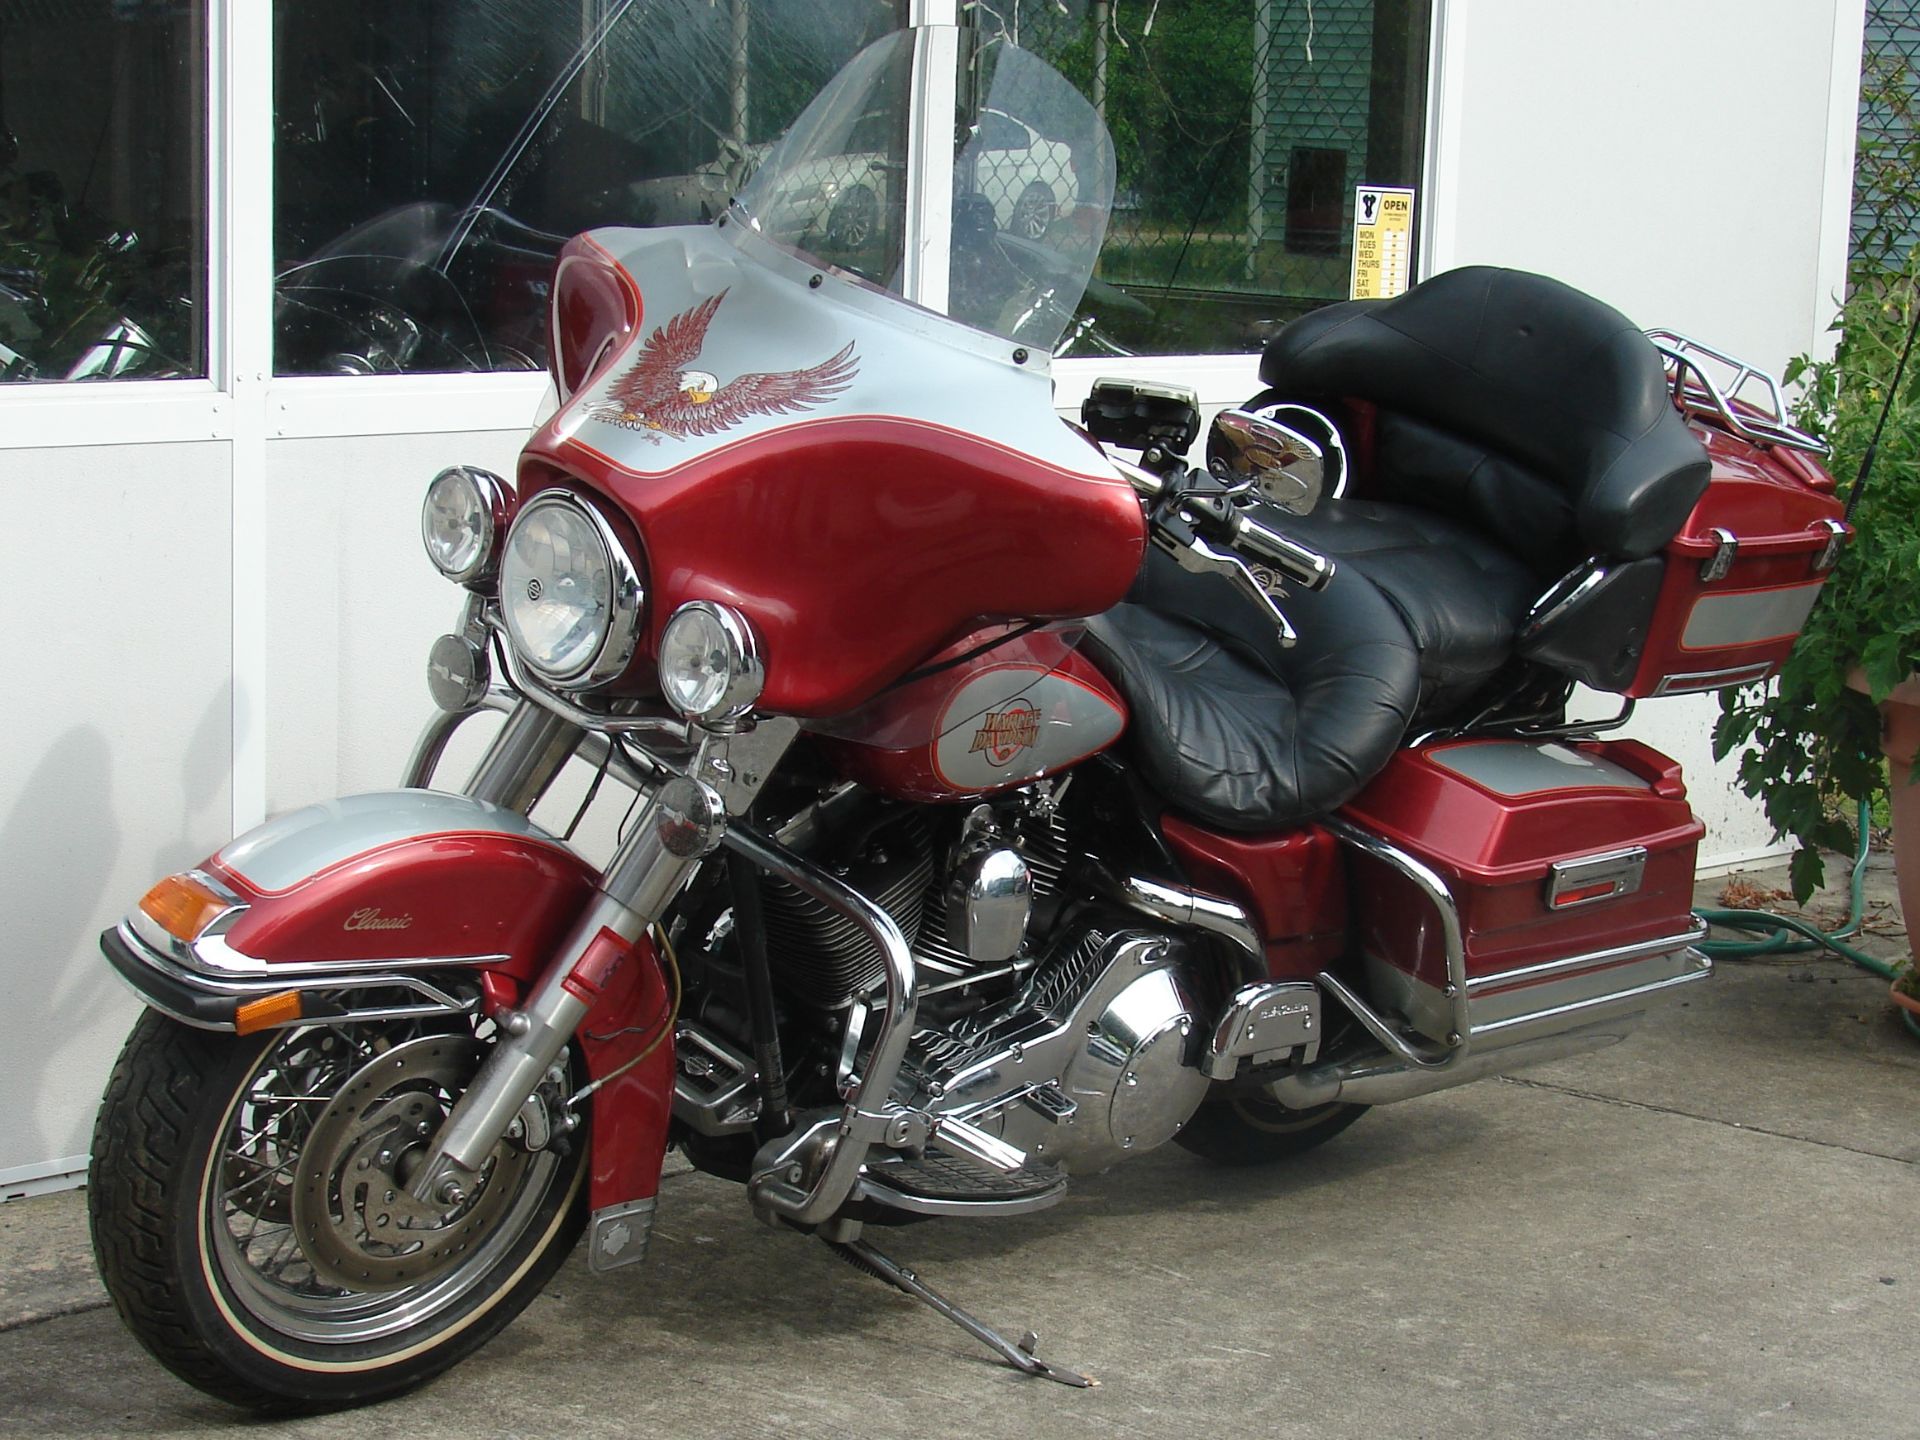 2004 Harley-Davidson Ultra Classic in Williamstown, New Jersey - Photo 9